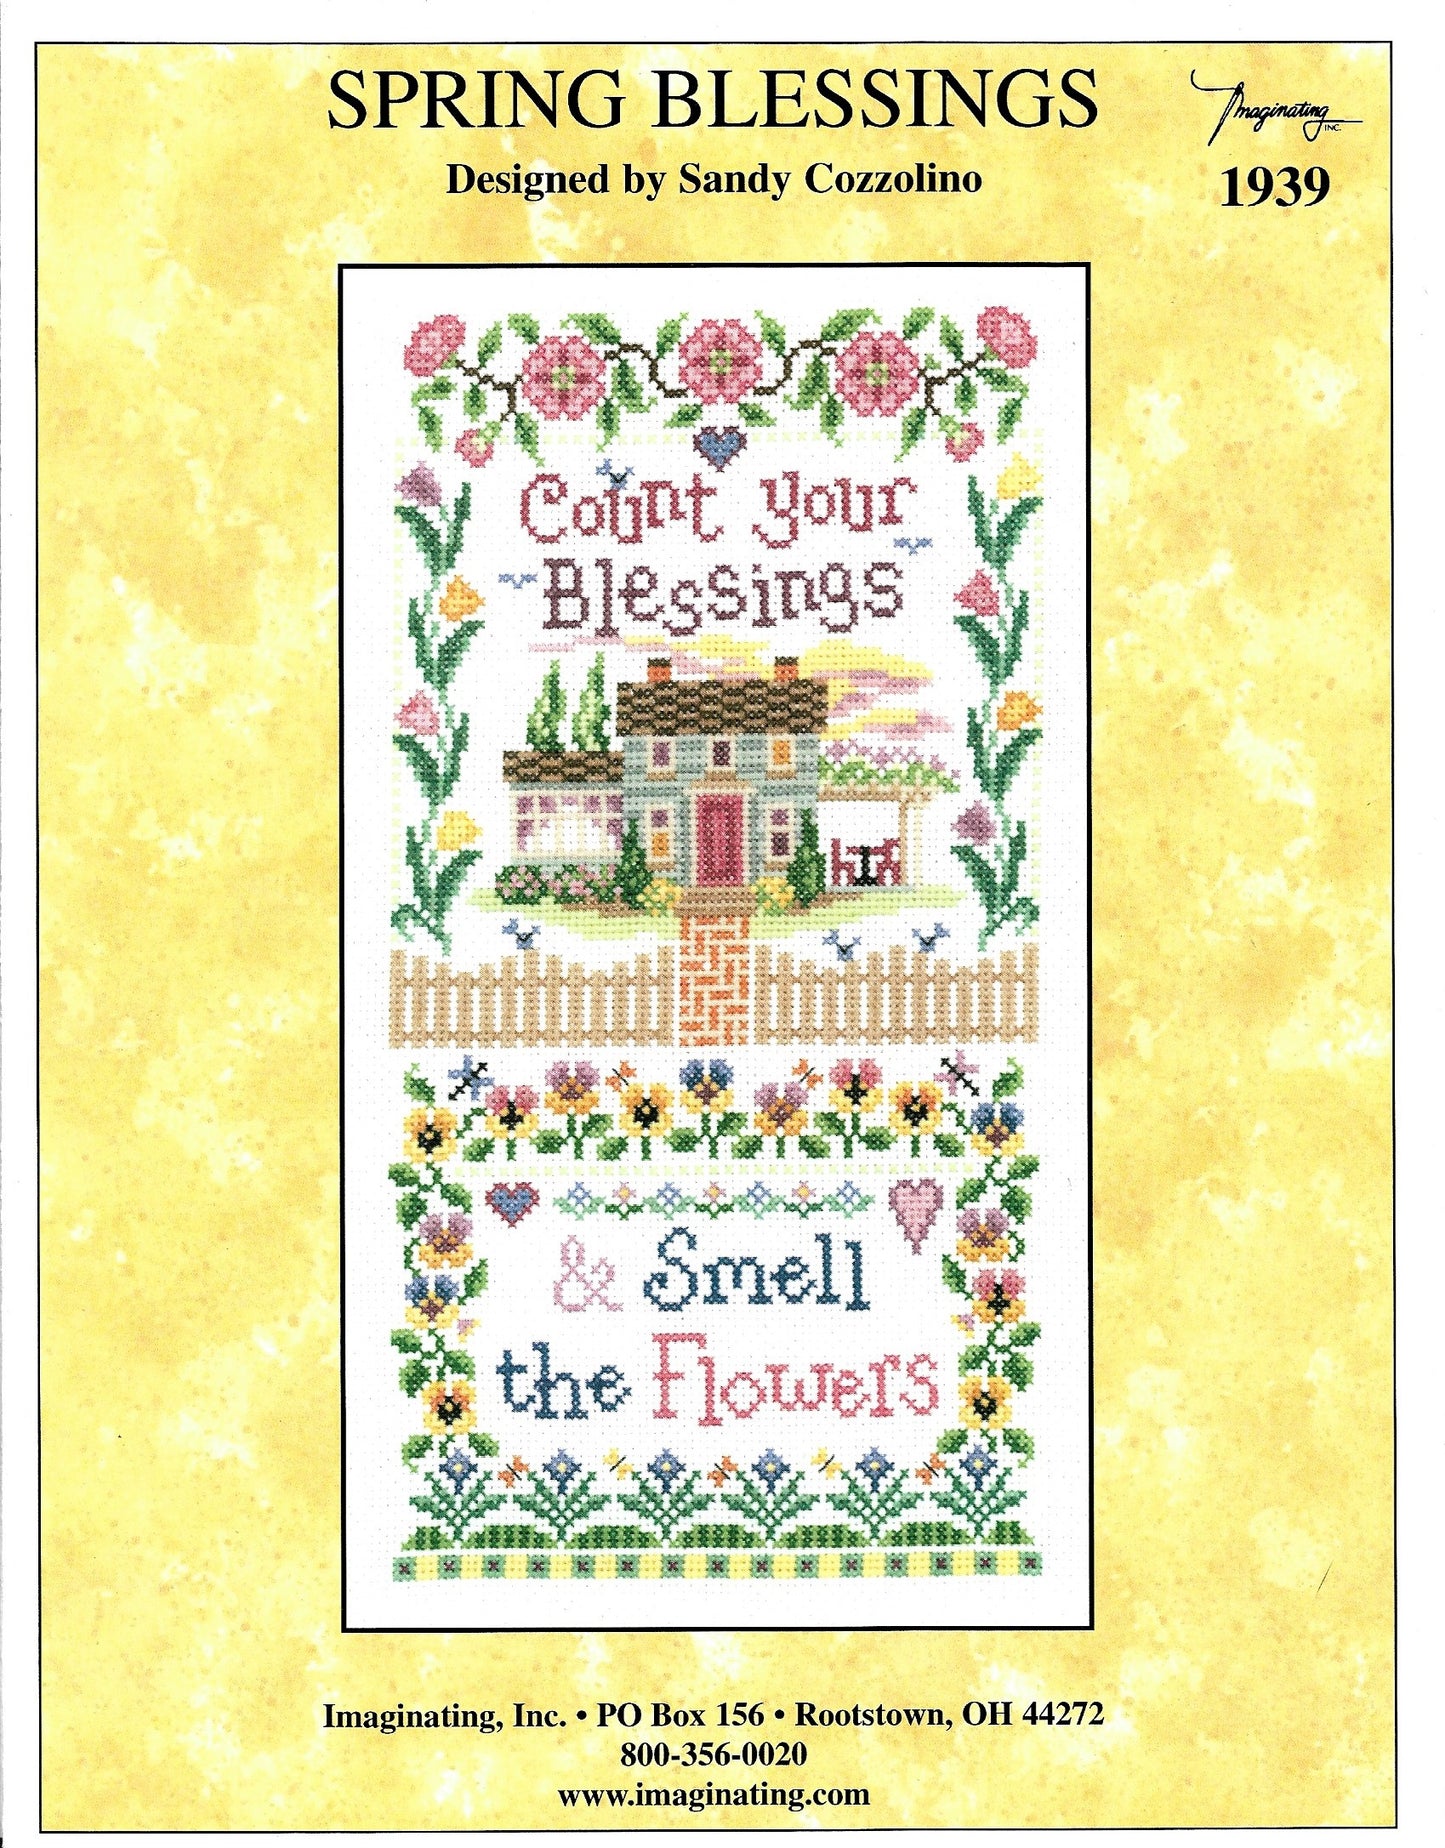 Imaginating Spring Blessings 1939 cross stitch pattern